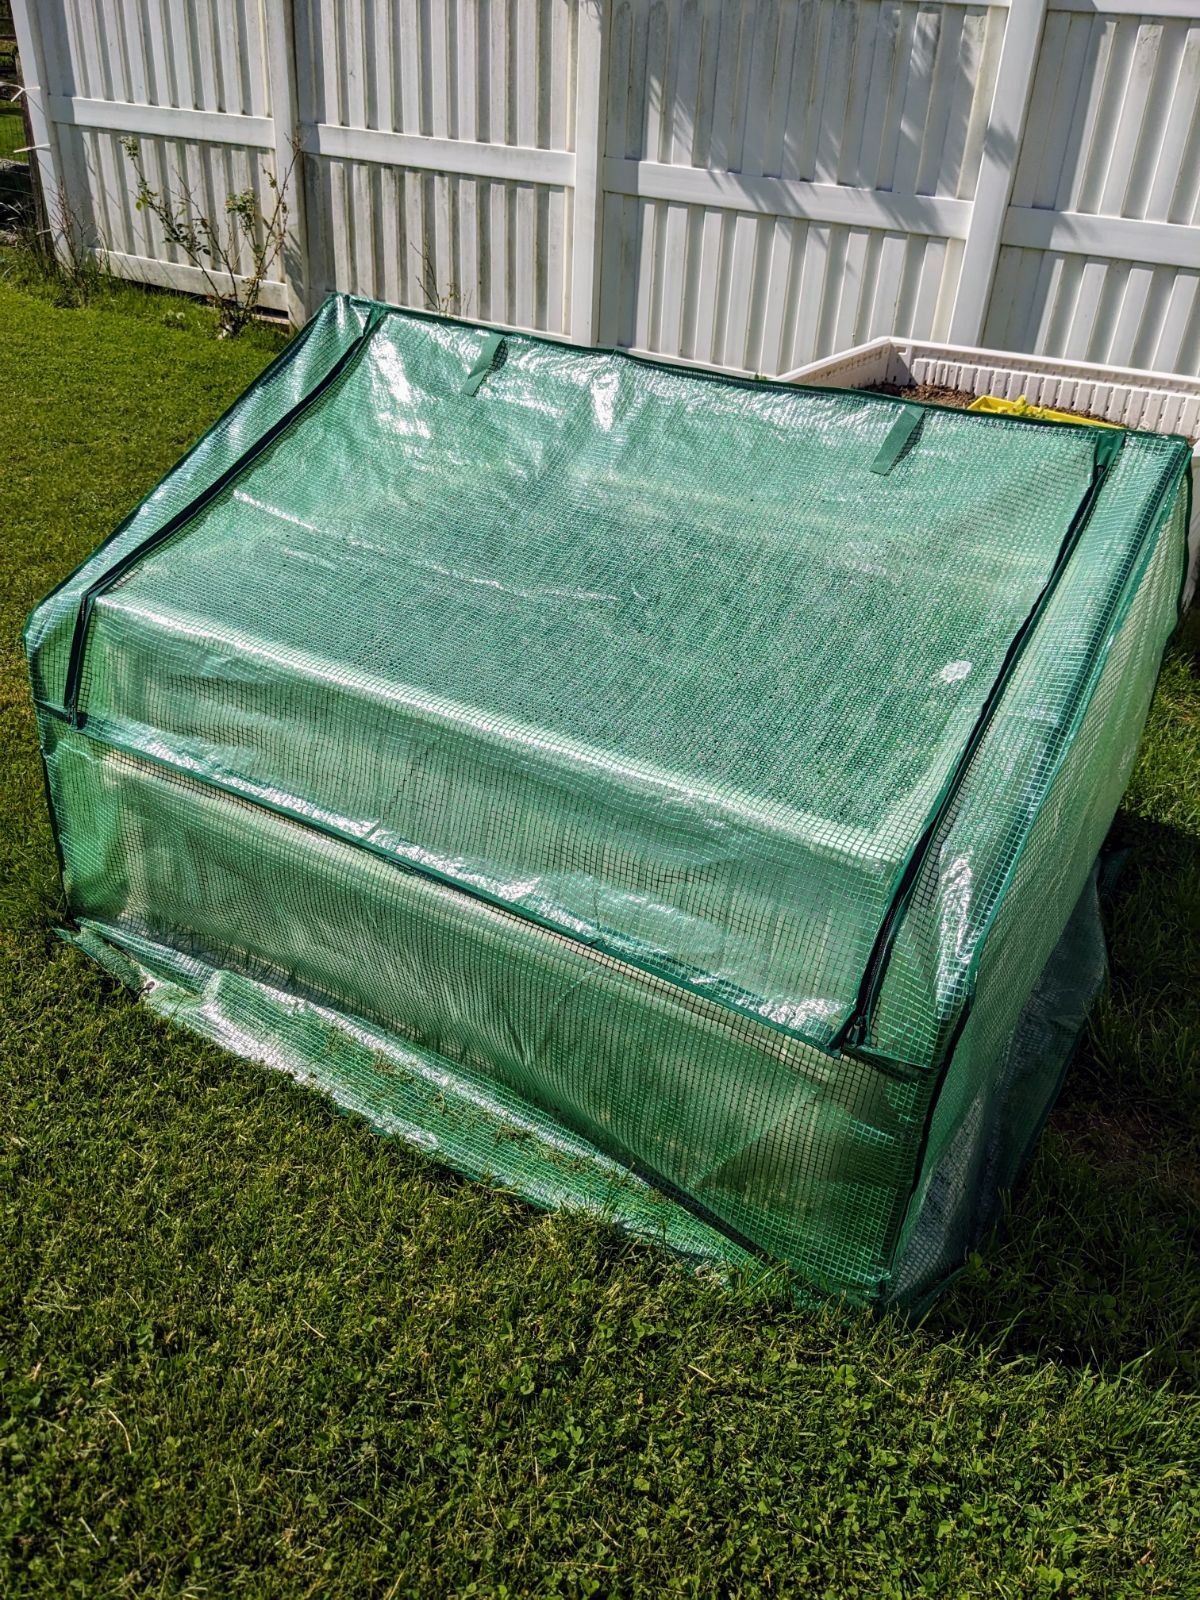 Fully zipped greenhouse cover for raised beds by Aldi